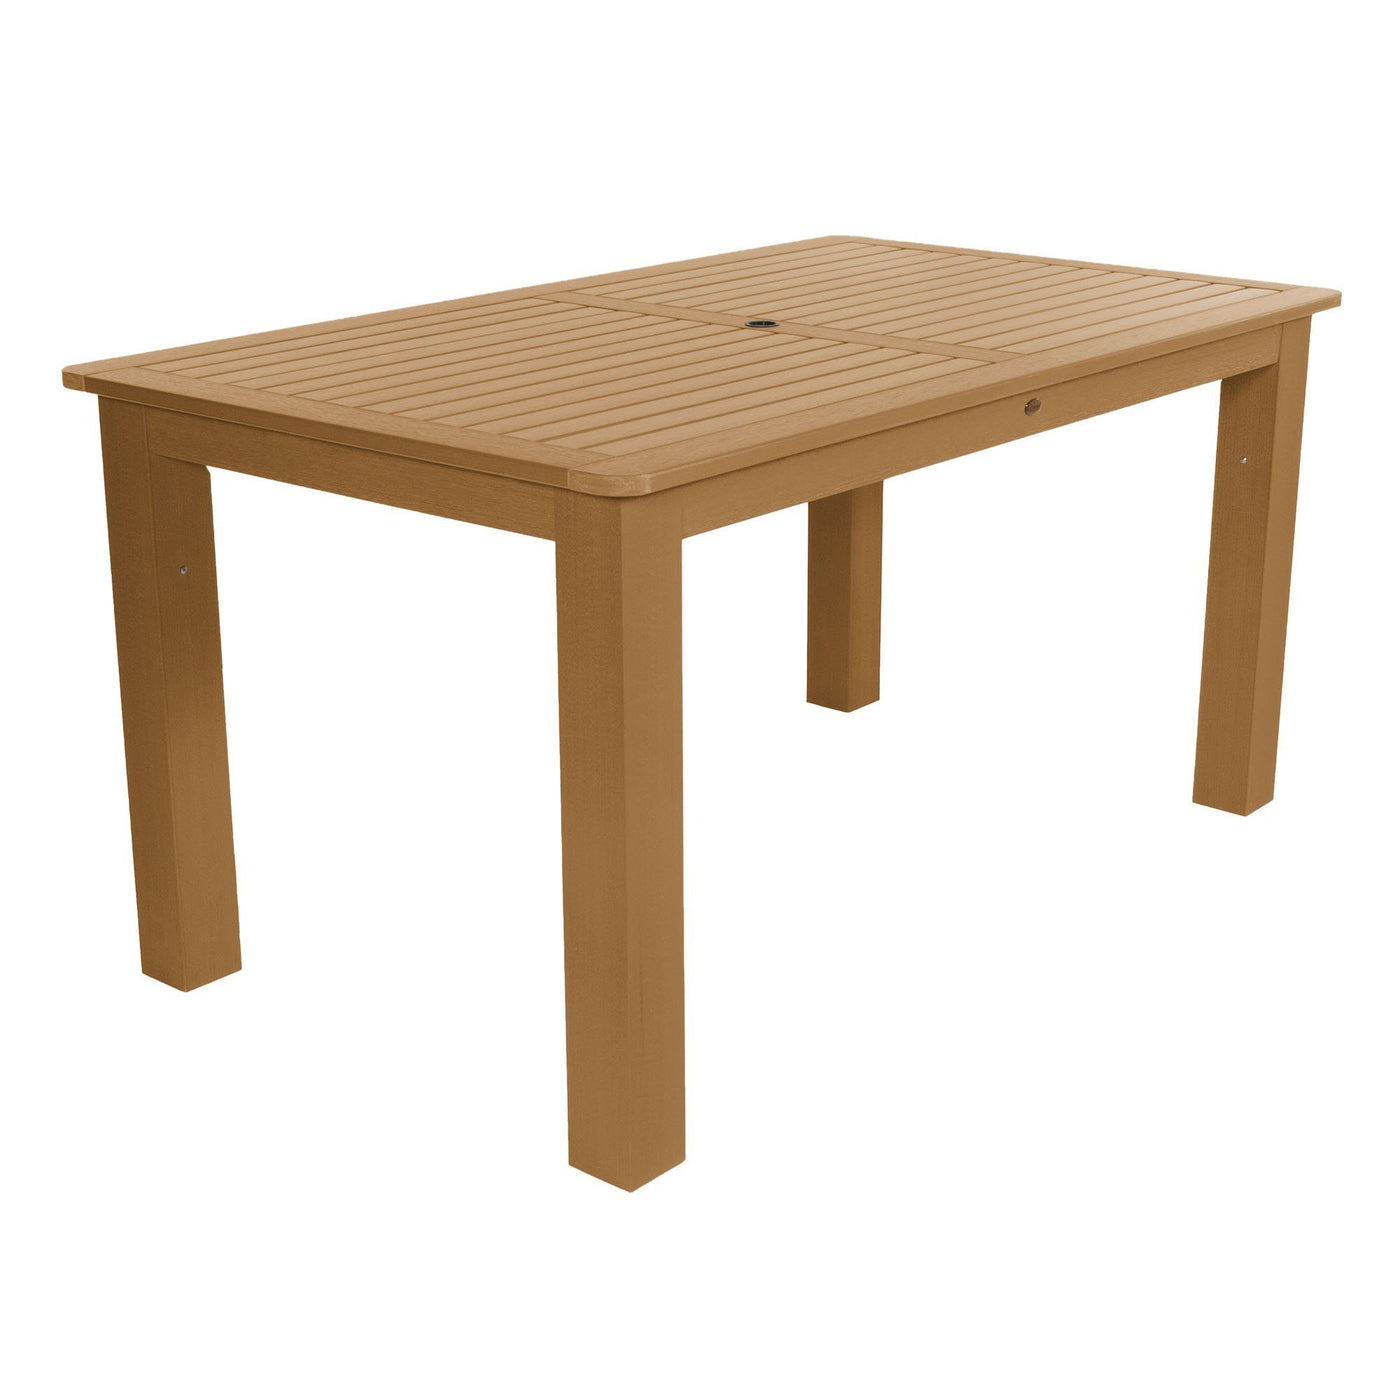 Rectangular 42in x 72in Outdoor Dining Table - Counter Height Dining Highwood USA Toffee 